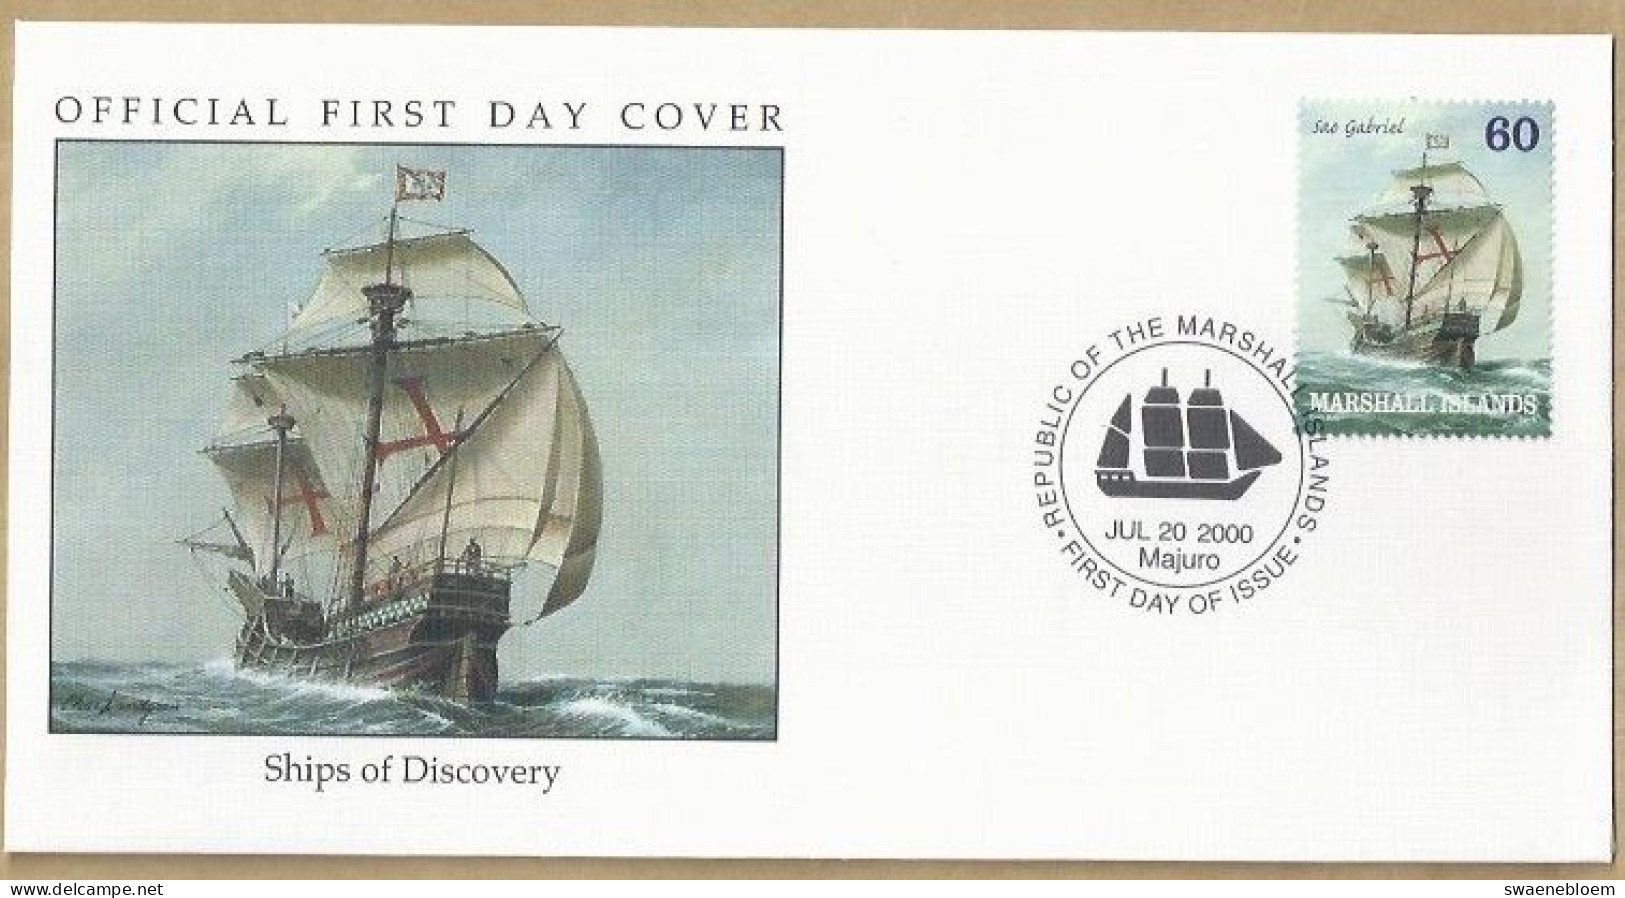 FDC. REPUBLIC OF THE MARSHALL ISLANDS. JUL 20 2000 MAJURO. SHIPS OF DISCOVERY. SAO GABRIEL. C163.FDC. (6-6). - Marshalleilanden